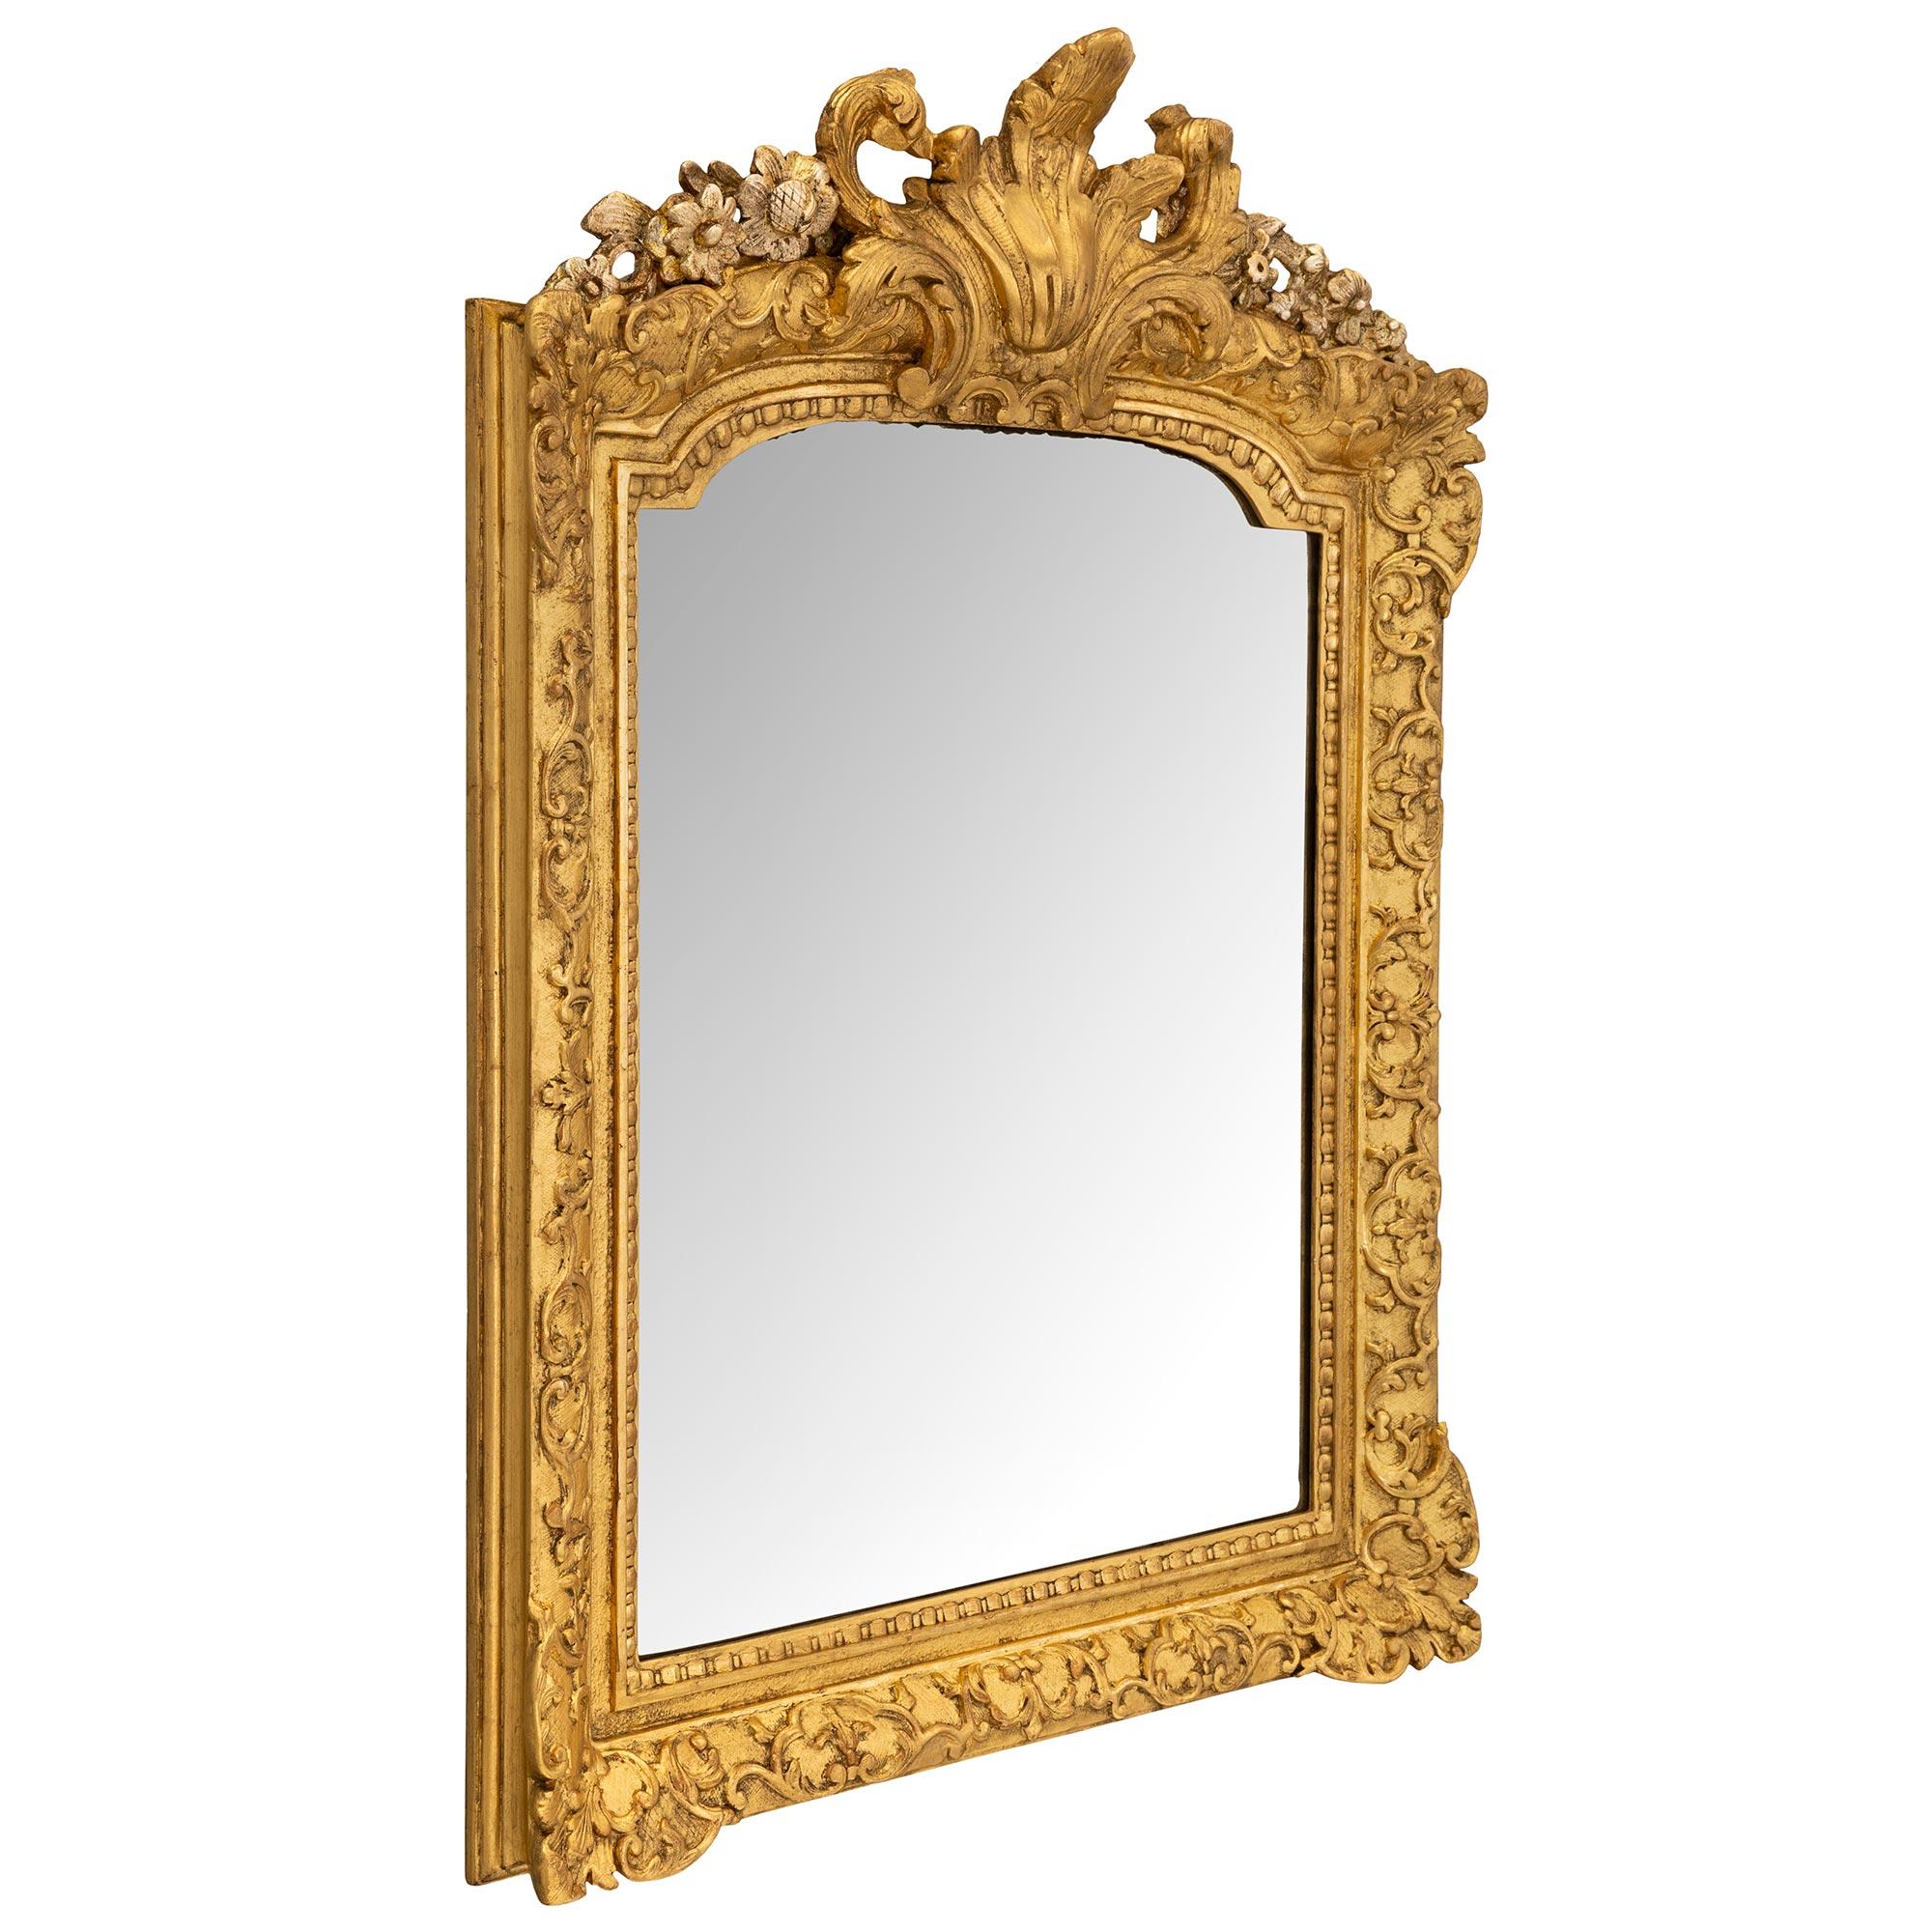 A stunning and most charming French early 18th century Régence period giltwood and mecca mirror. The mirror retains its original mirror plate set within a fine mottled, reeded, and beaded frame. Beautiful and extremely decorative interlocking